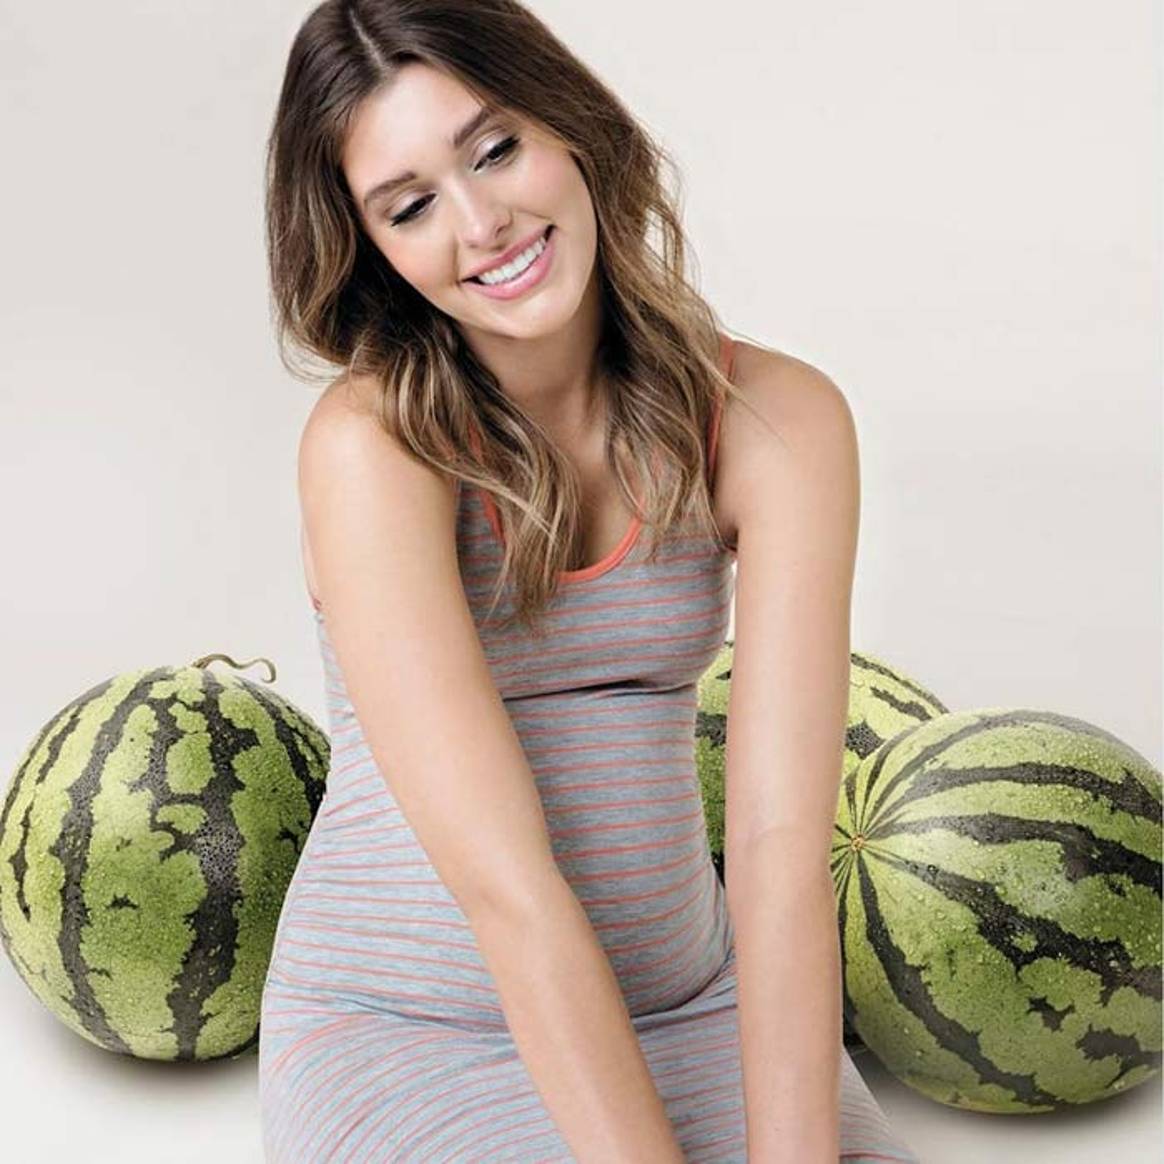 Ripe Maternity launches at Mothercare UK